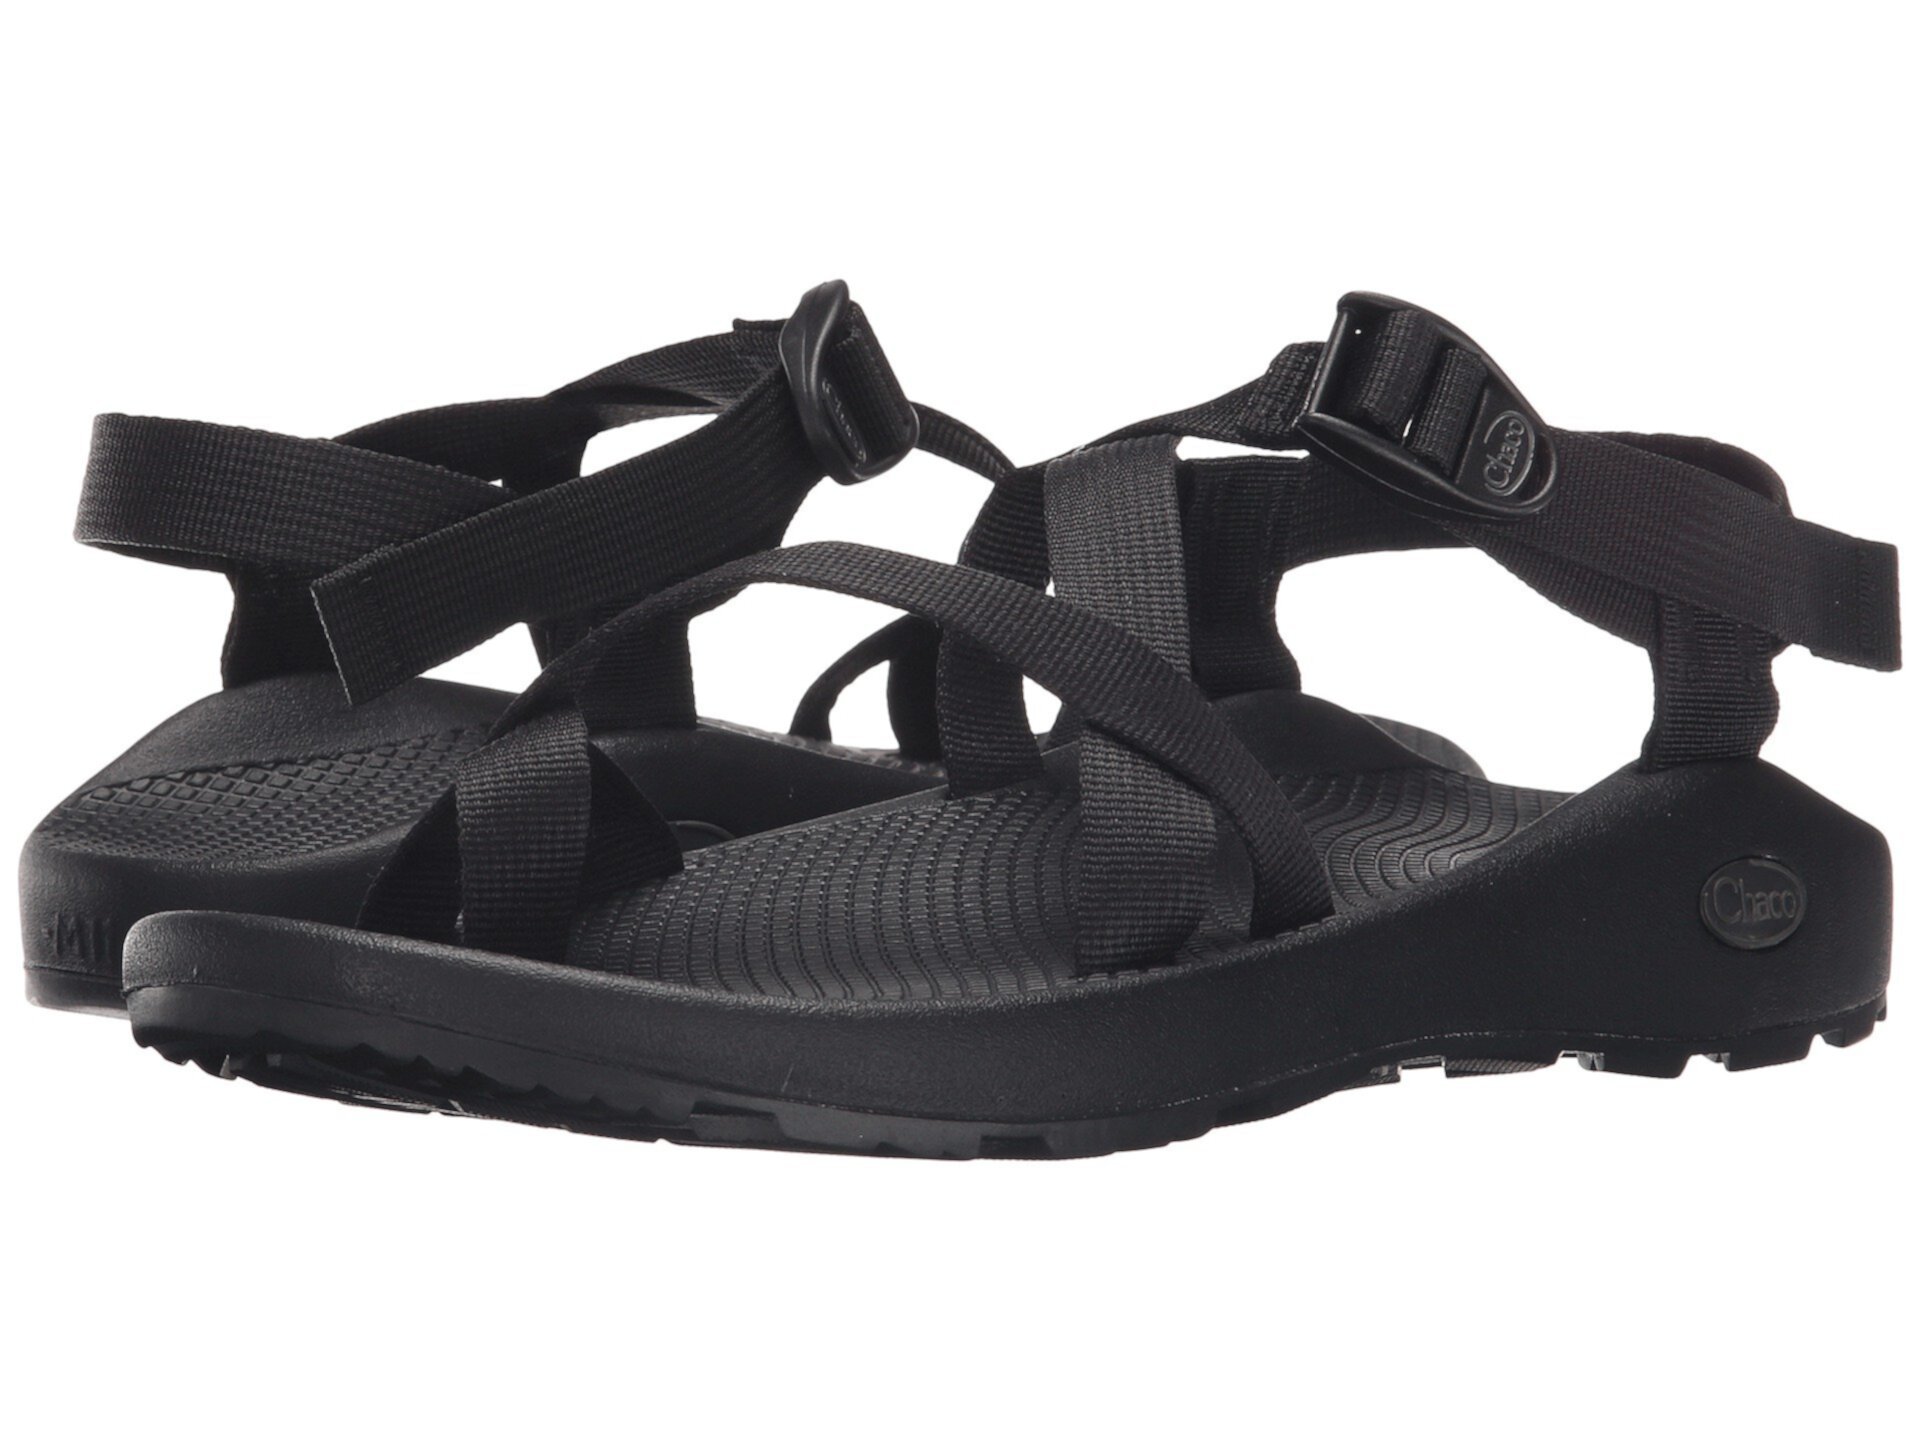 Z / 2® Classic Chaco